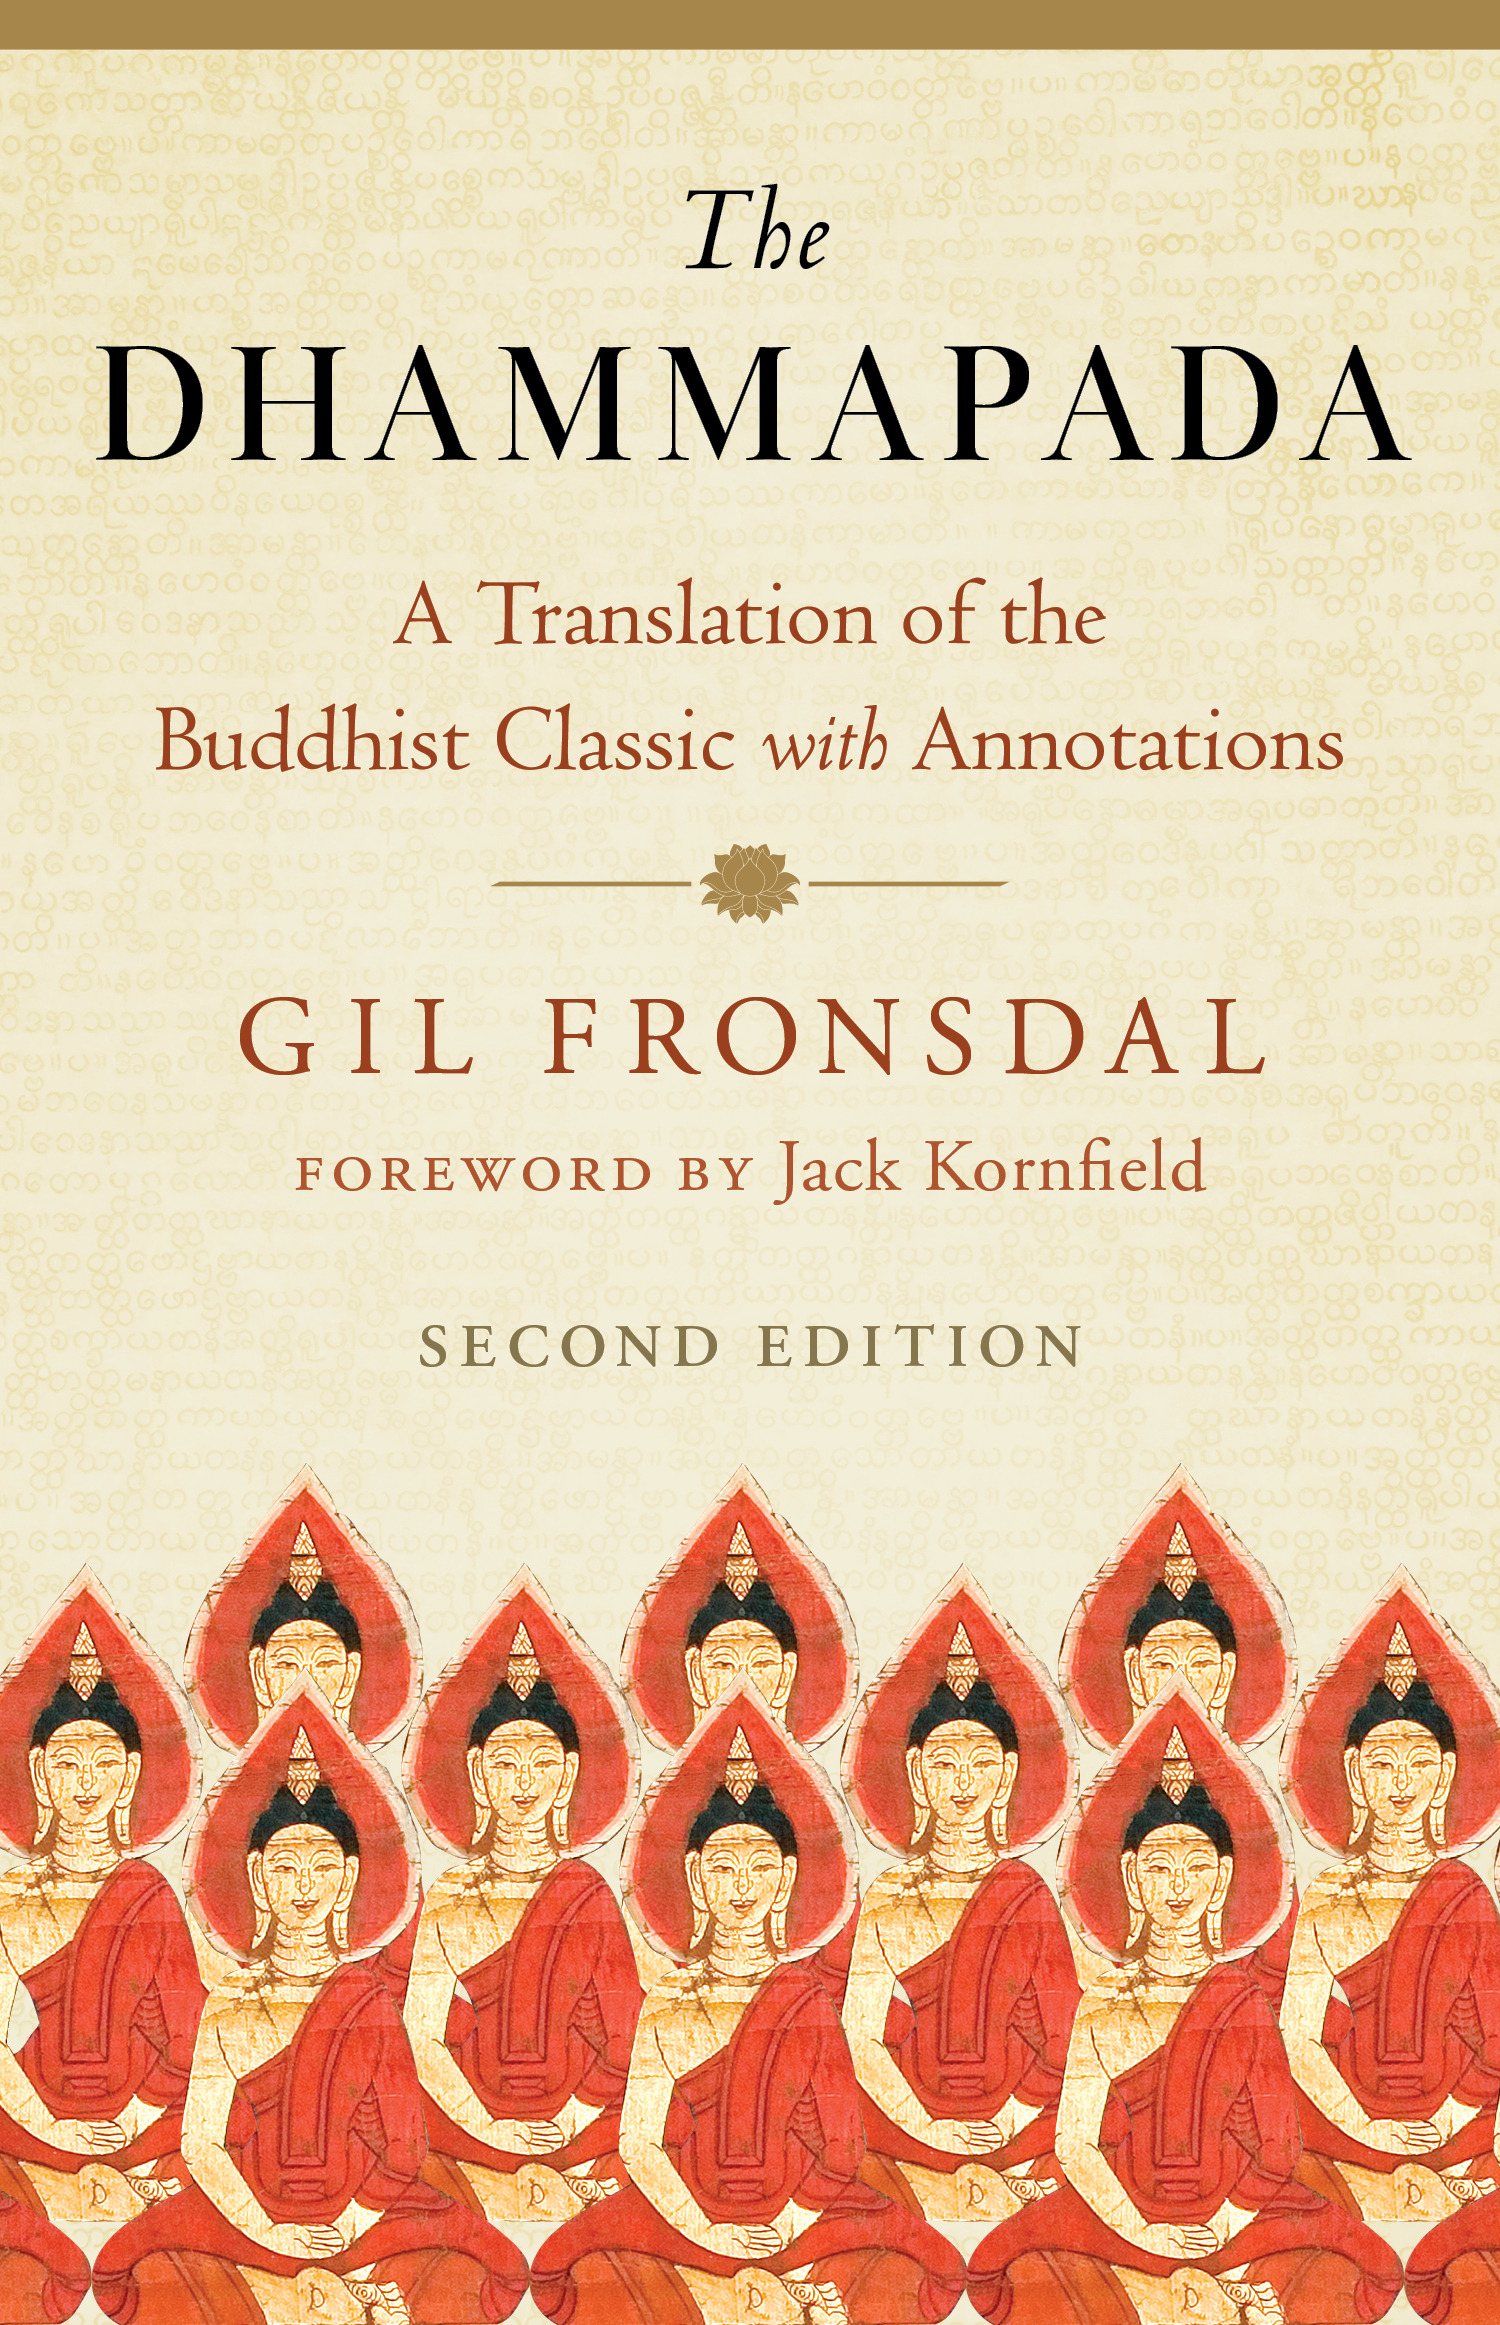 The Dhammapada : A Translation of the Buddhist Classic with Annotations | Fronsdal, Gil (Auteur)